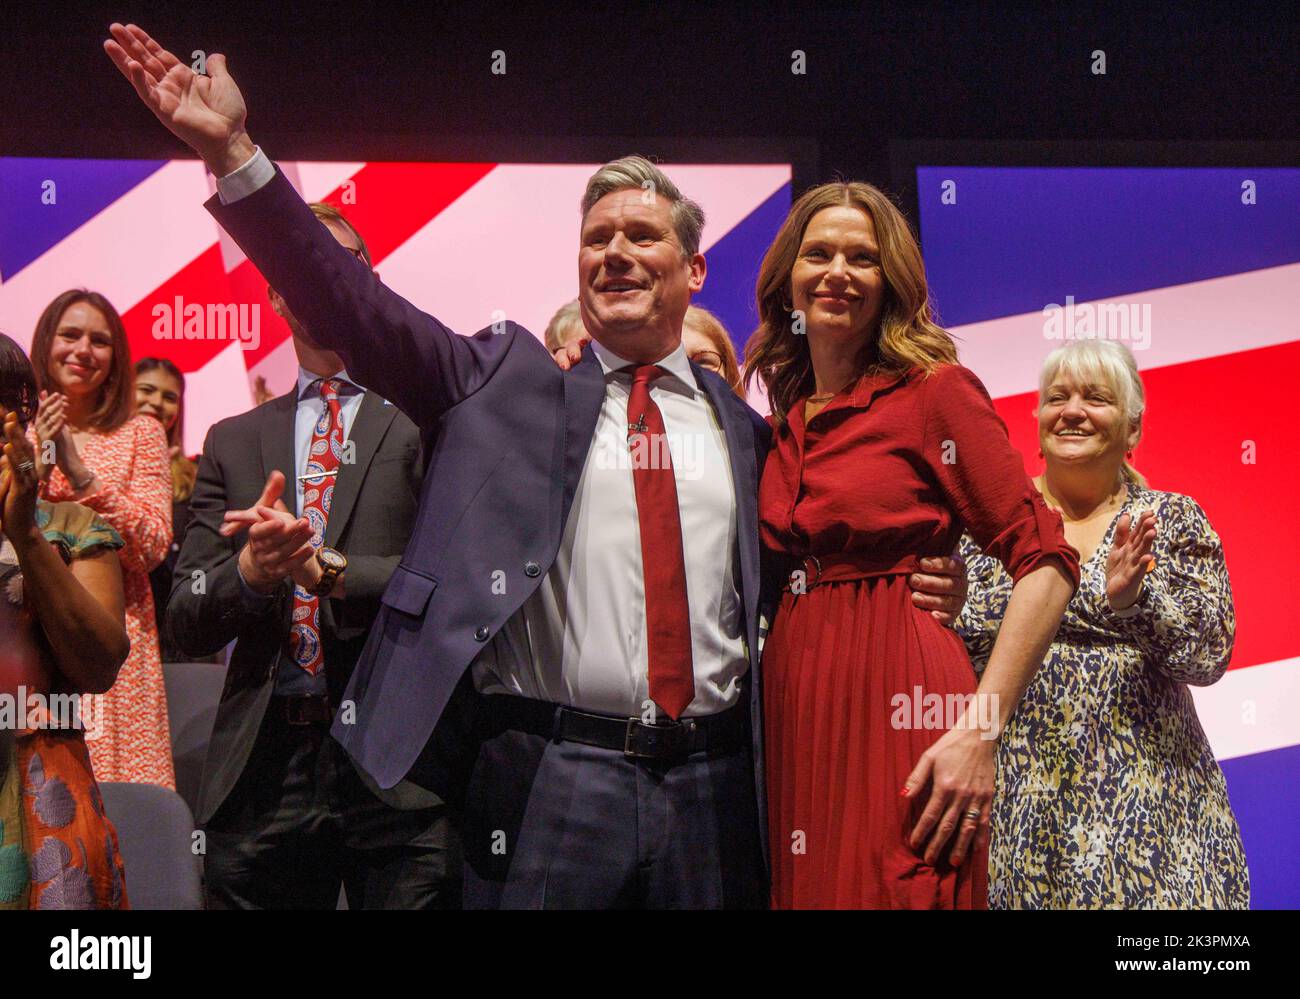 Liverpool, UK. 27th Sep, 2022. Labour Leader, Sir Keir Starmer with his wife Victoria. Labour Leader, Sir Keir Starmer, gives his keynote speech at the Labour Party conference in Liverpool. Credit: Karl Black/Alamy Live News Stock Photo